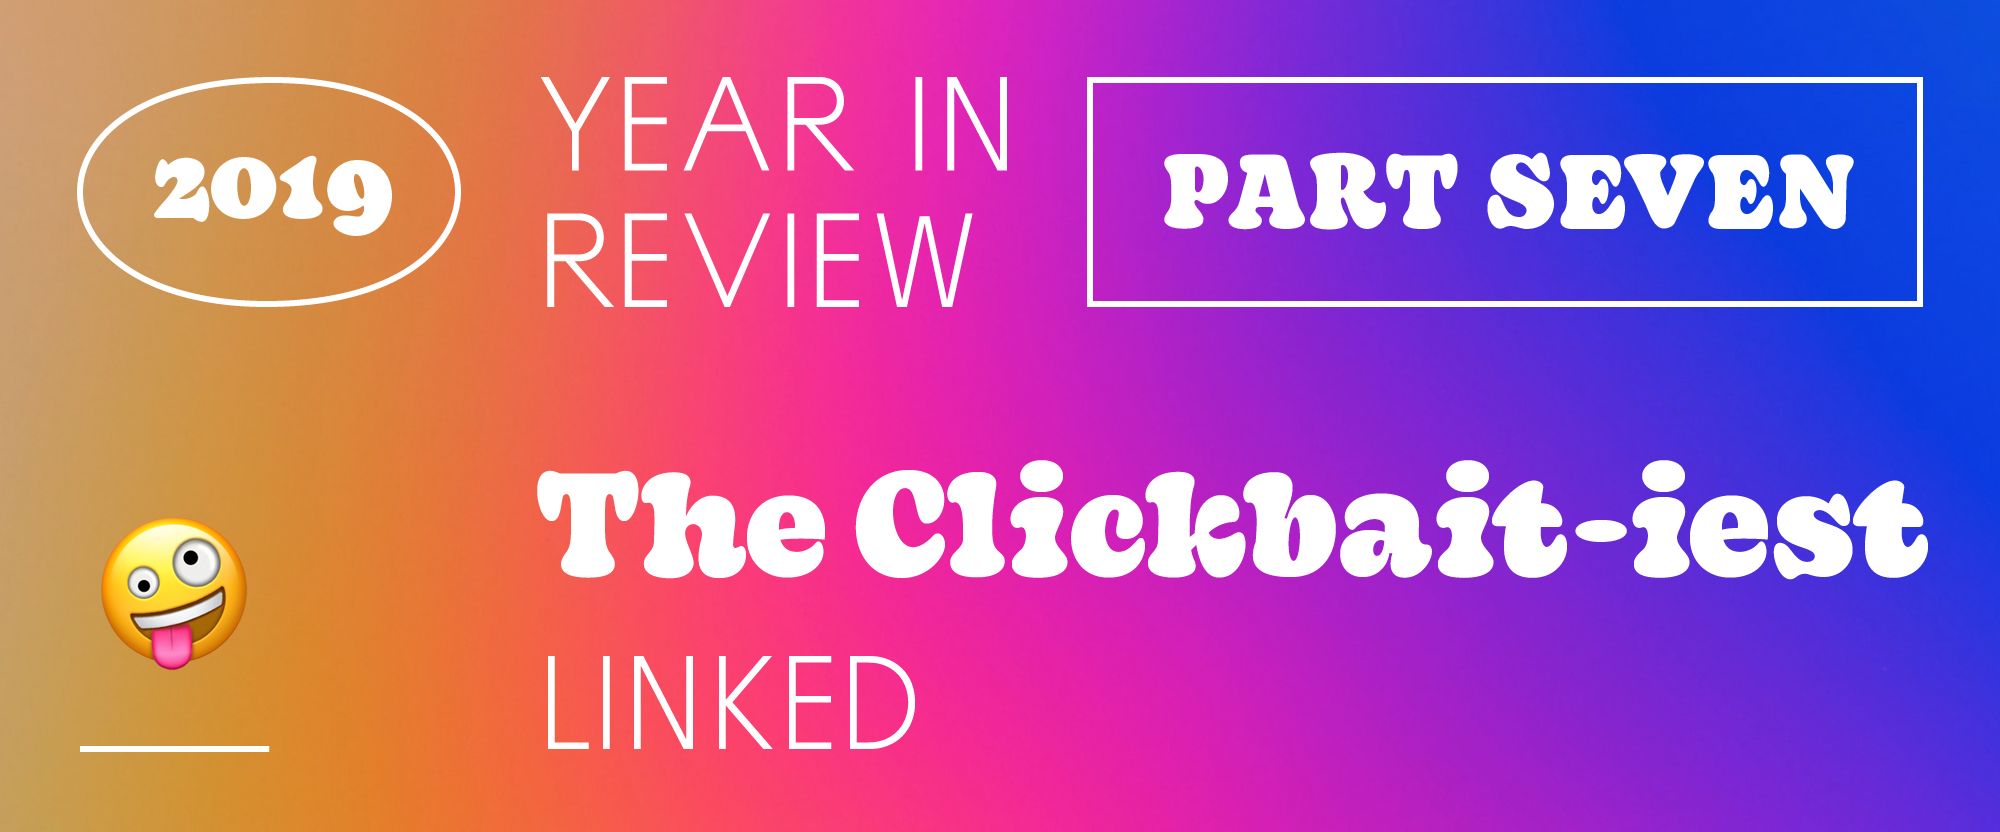 The Best and Worst Identities of 2019, Part 7: The Clickbait-iest Linked